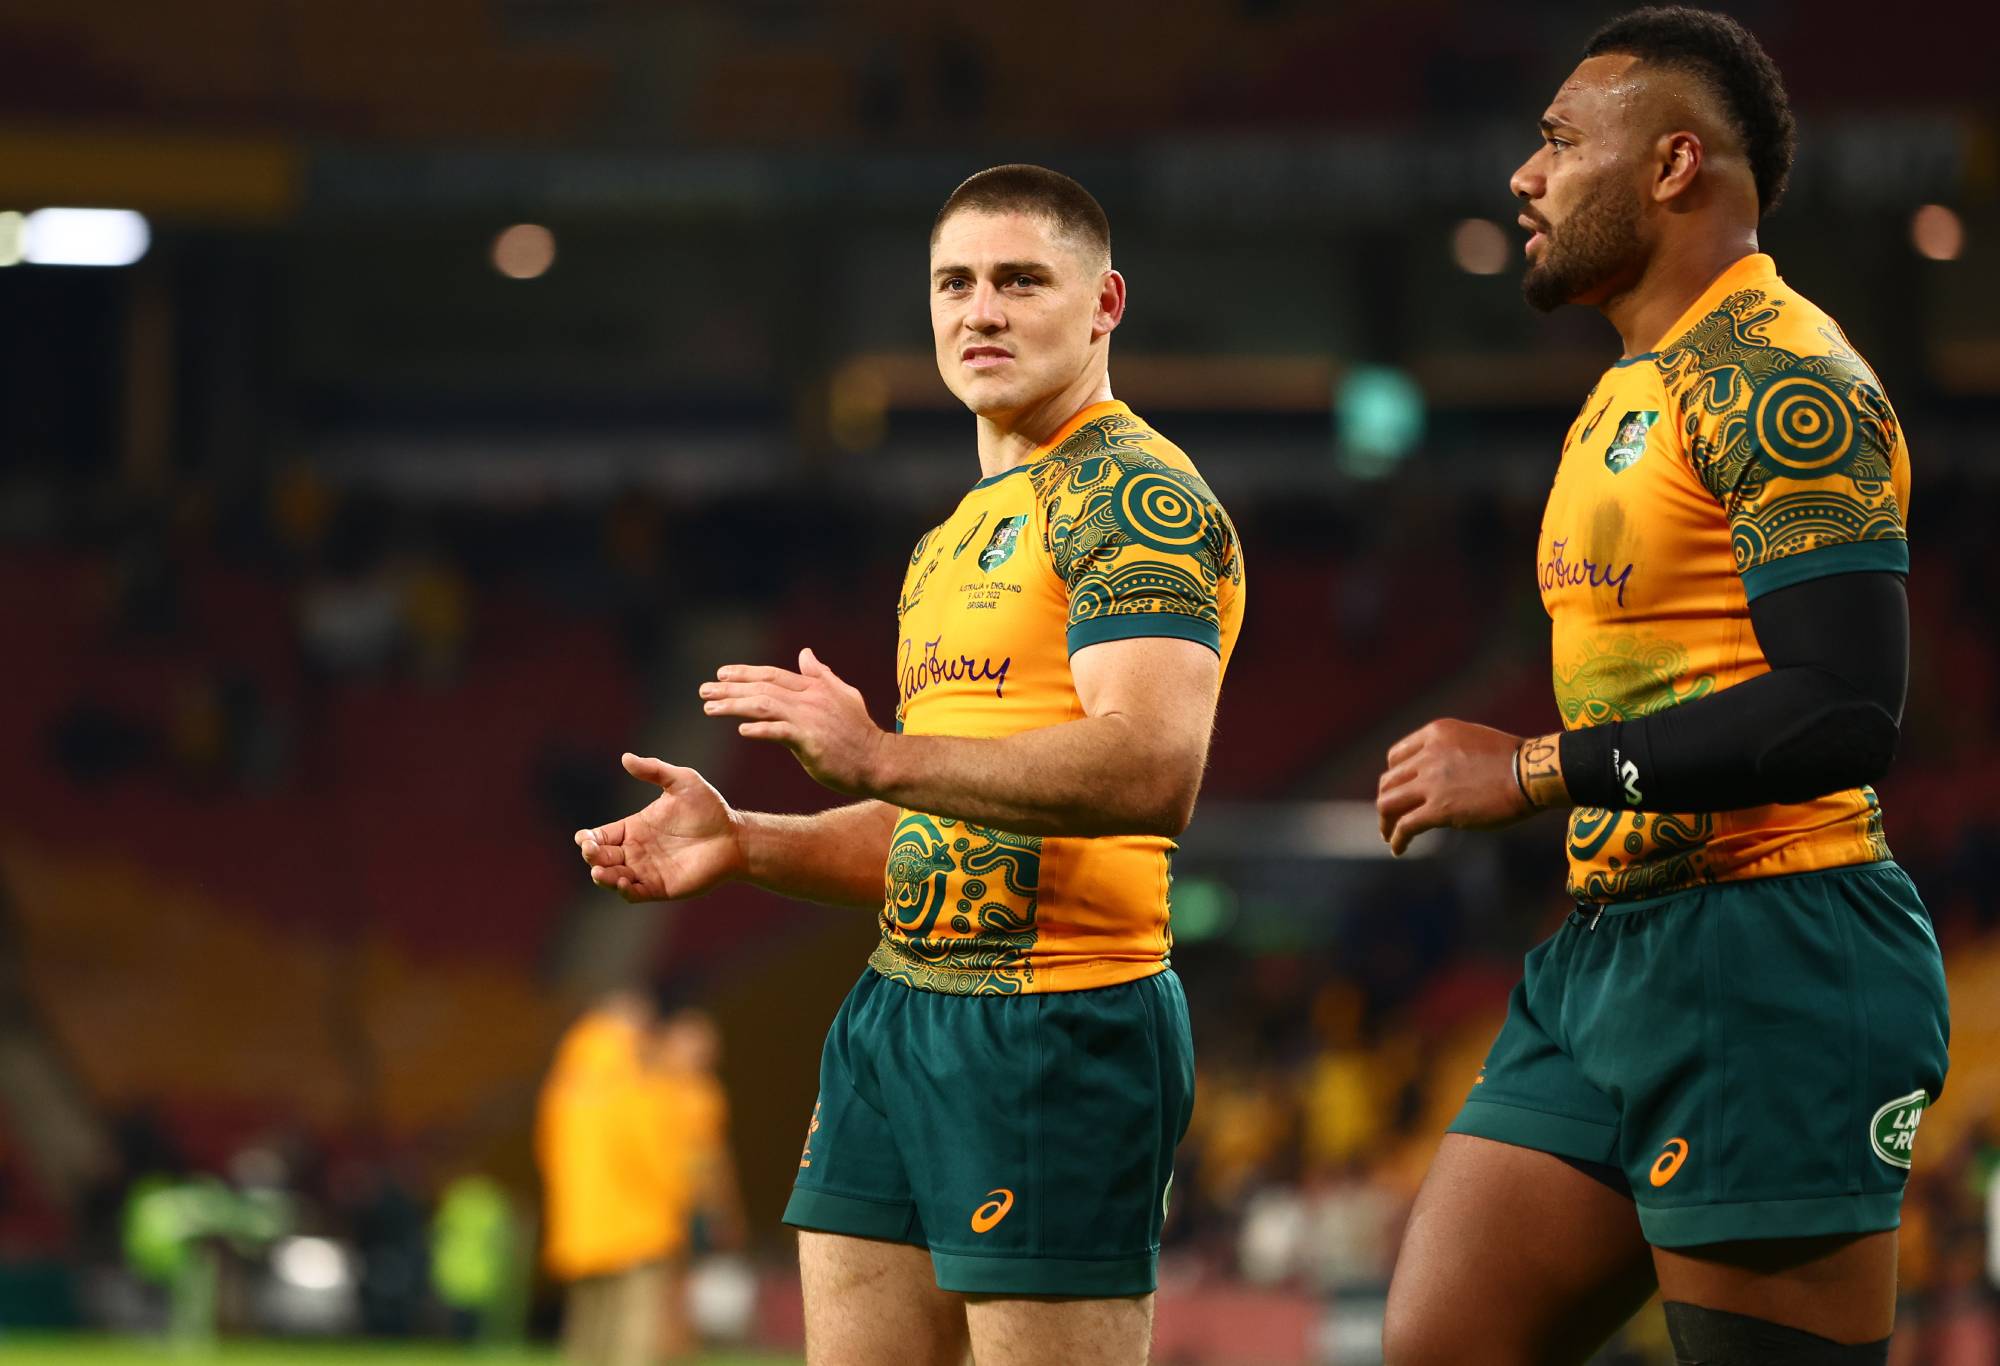 James O'Connor of the Wallabies after game two of the International Test Match series between the Australia Wallabies and England at Suncorp Stadium on July 09, 2022 in Brisbane, Australia. (Photo by Chris Hyde/Getty Images)